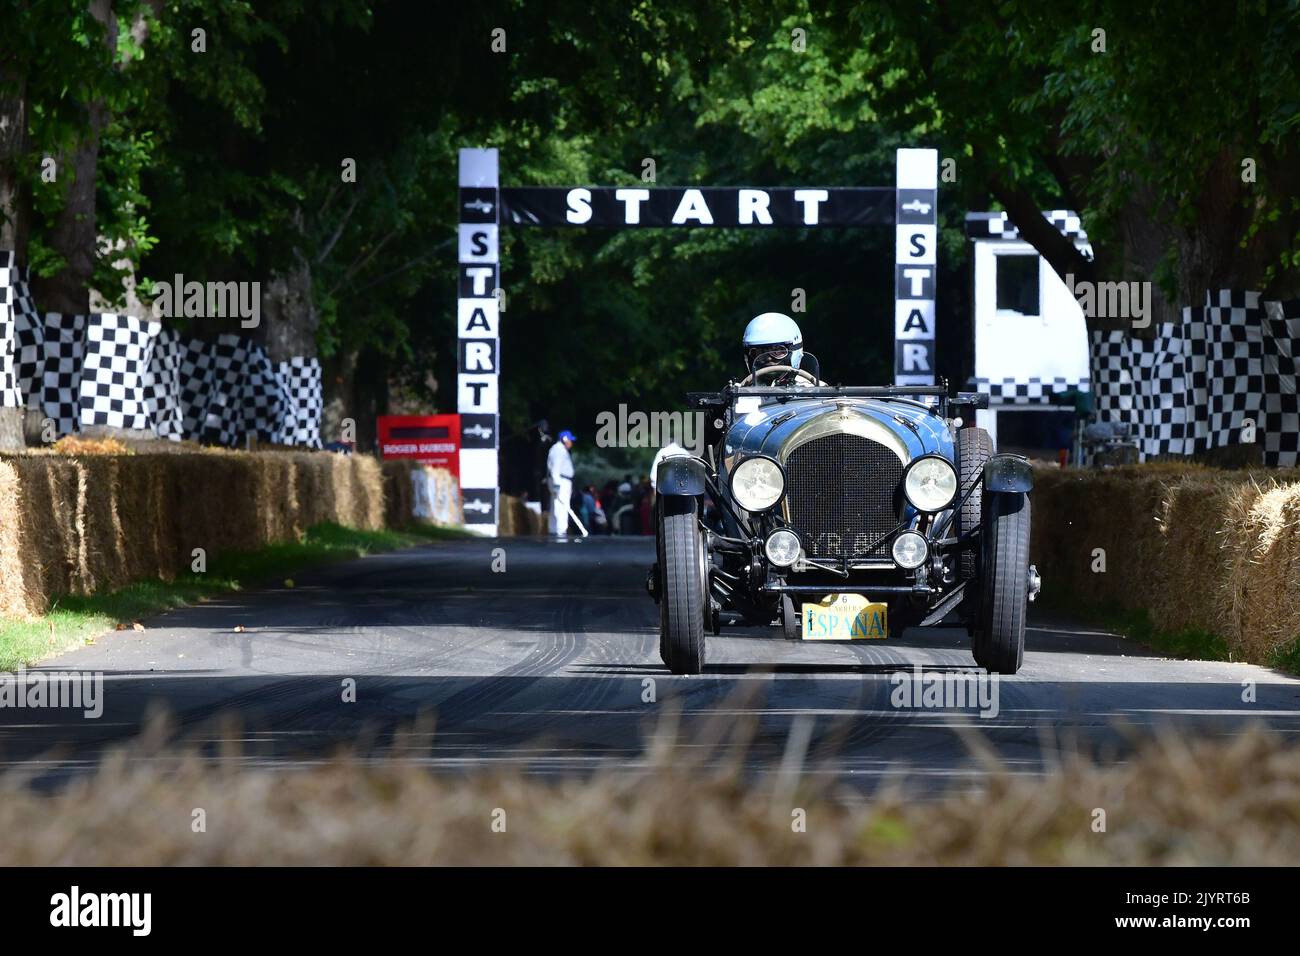 Nick Sleep, Bentley Supersport, From the early twenties innovative technology of the period such as supercharging greatly increased engine power, this Stock Photo